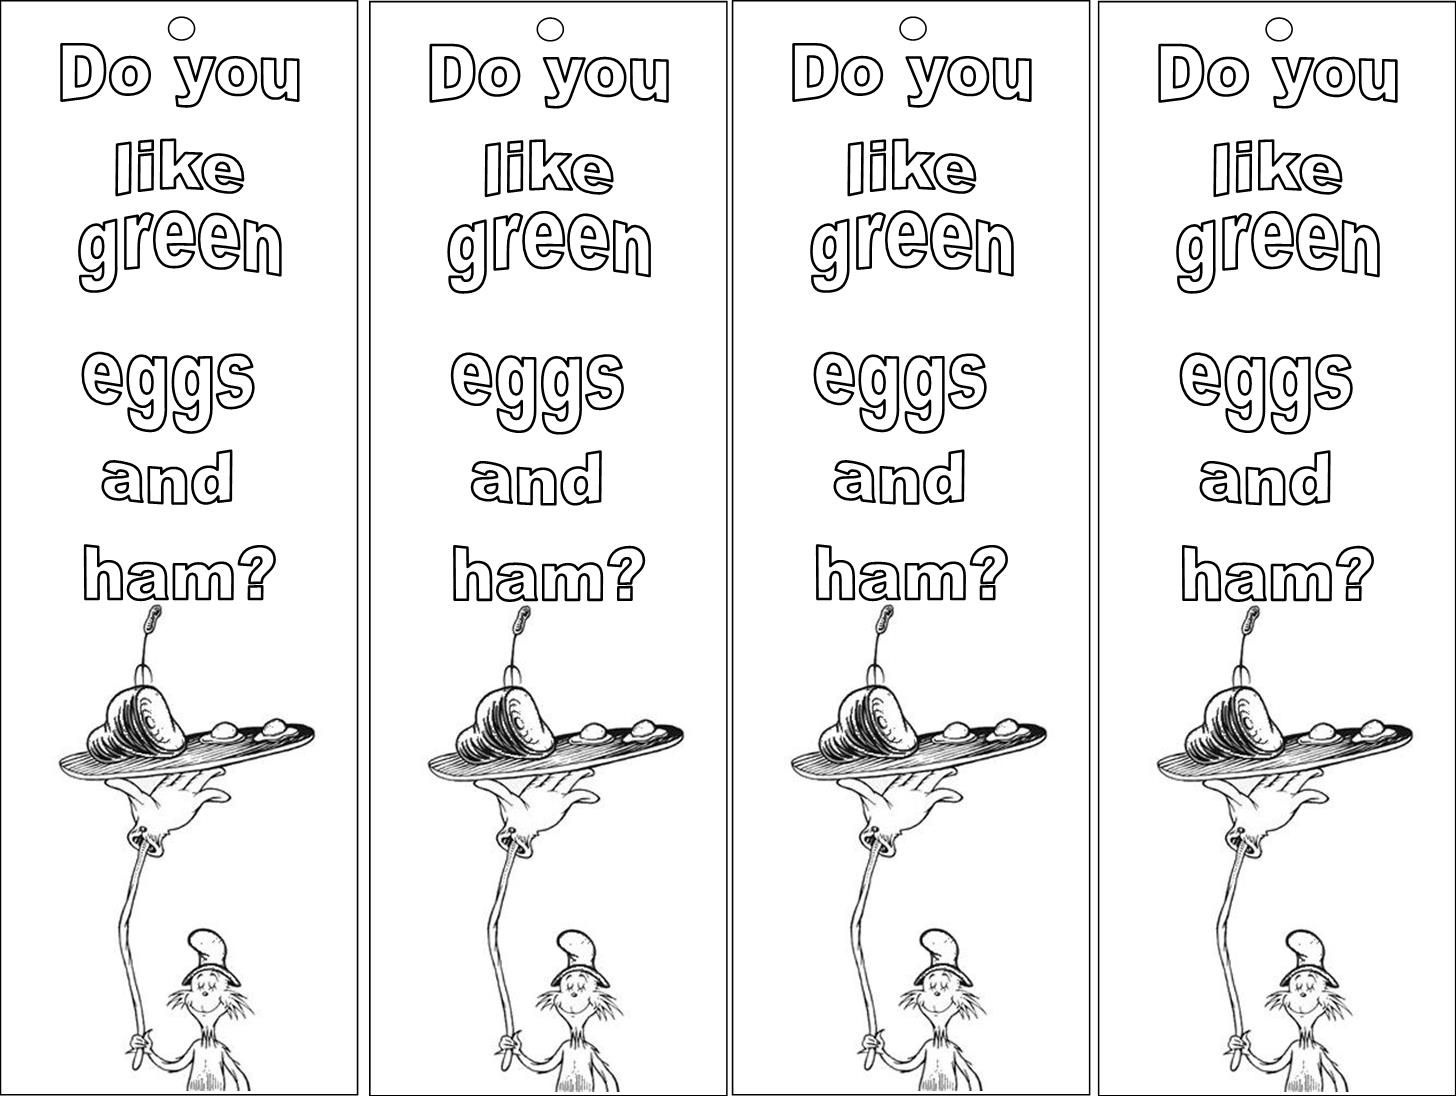 Green Eggs And Ham Dr. Seuss Bookmarks Free Printables | Story Time - Green Eggs And Ham Free Printables